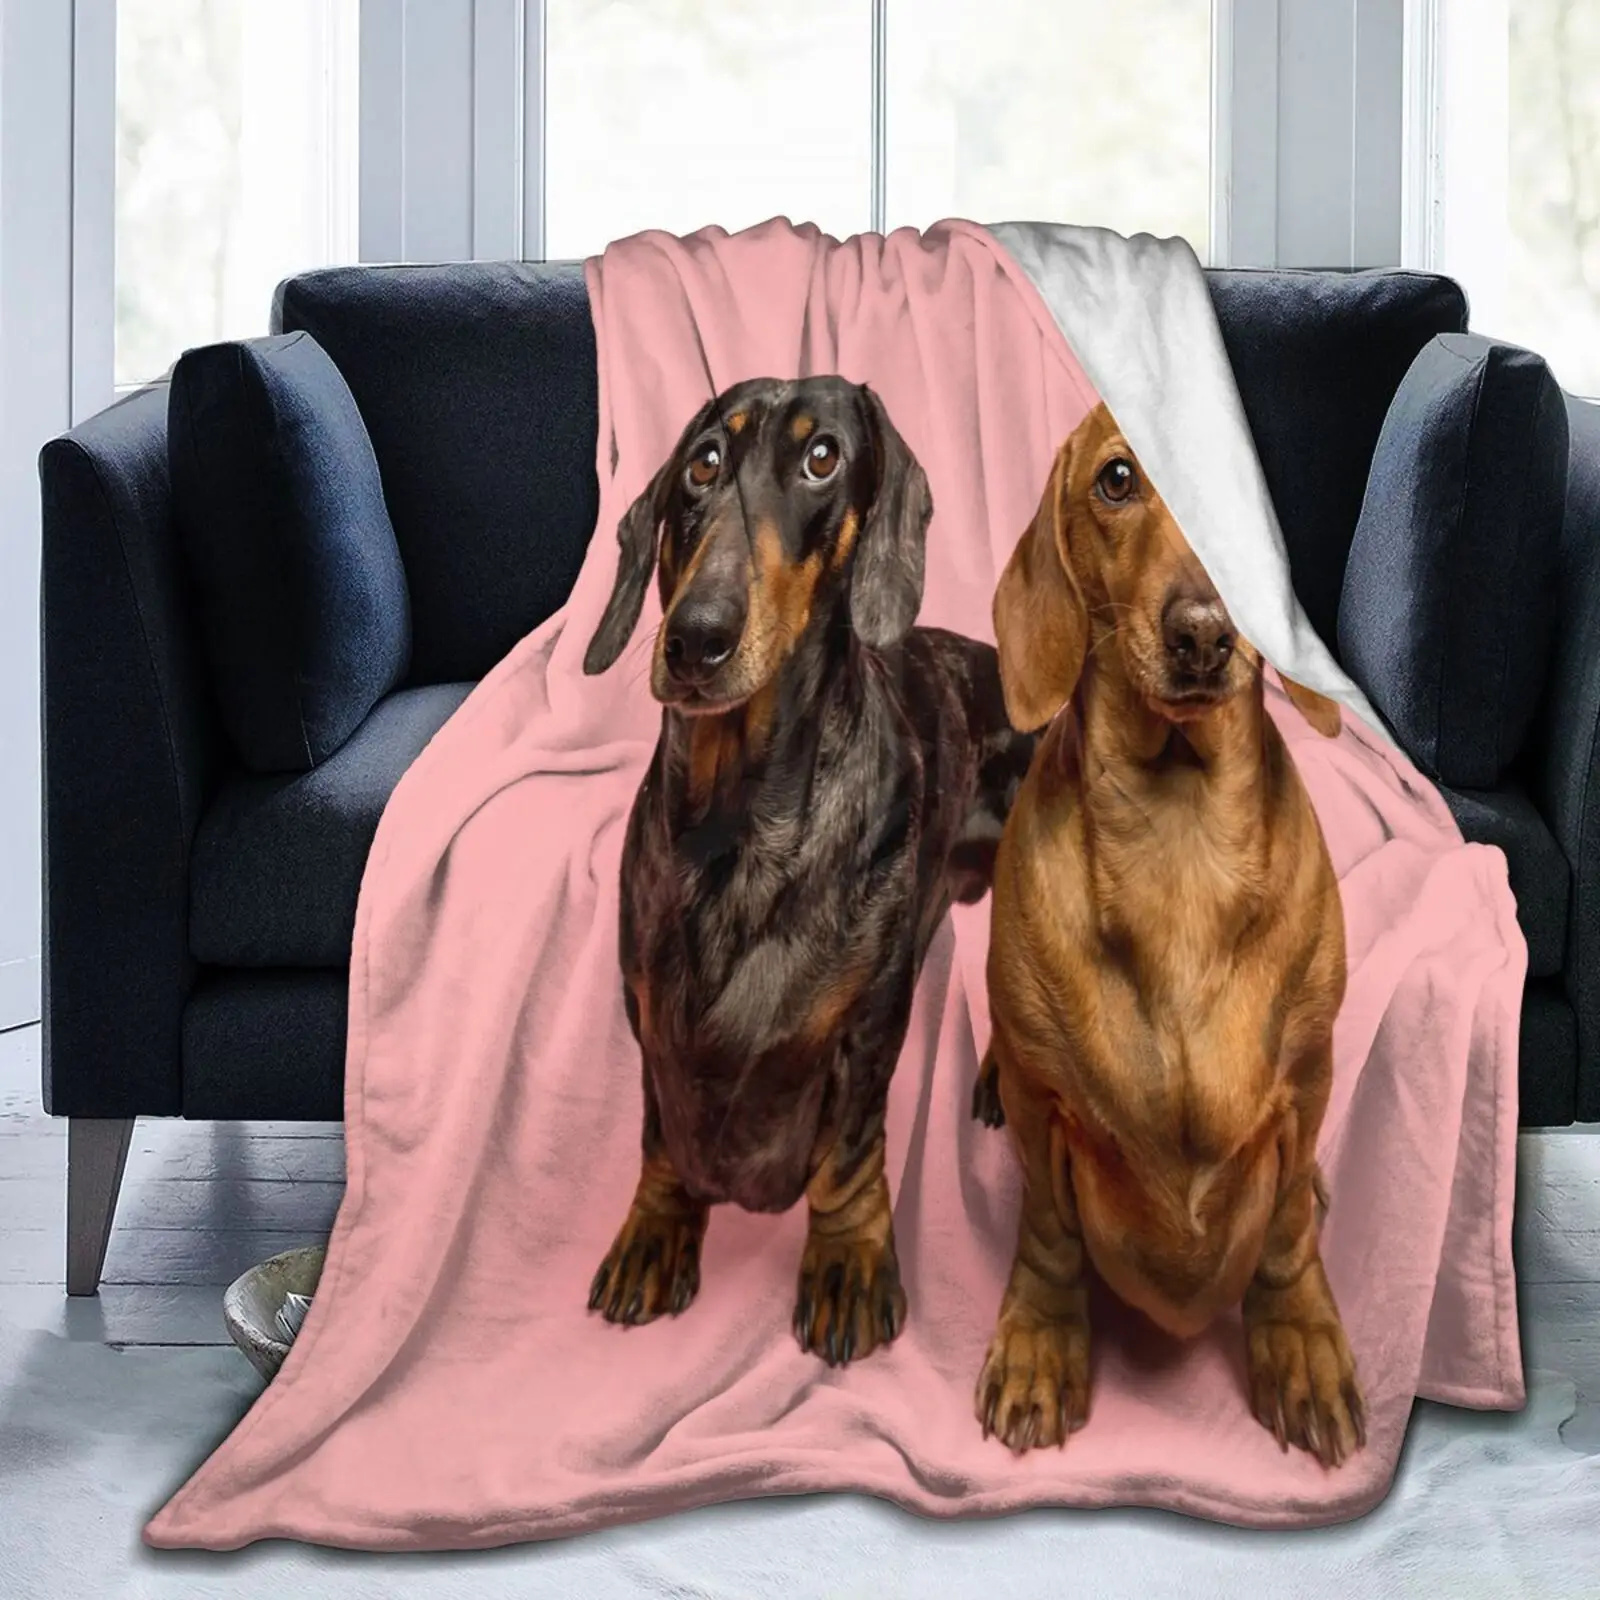 

Dachshund Dog Mint Green Flannel Fleece Blanket Cozy Warm Throw Blanket Micro Blanket for Couch Home Bed Sofa Gifts Super Soft